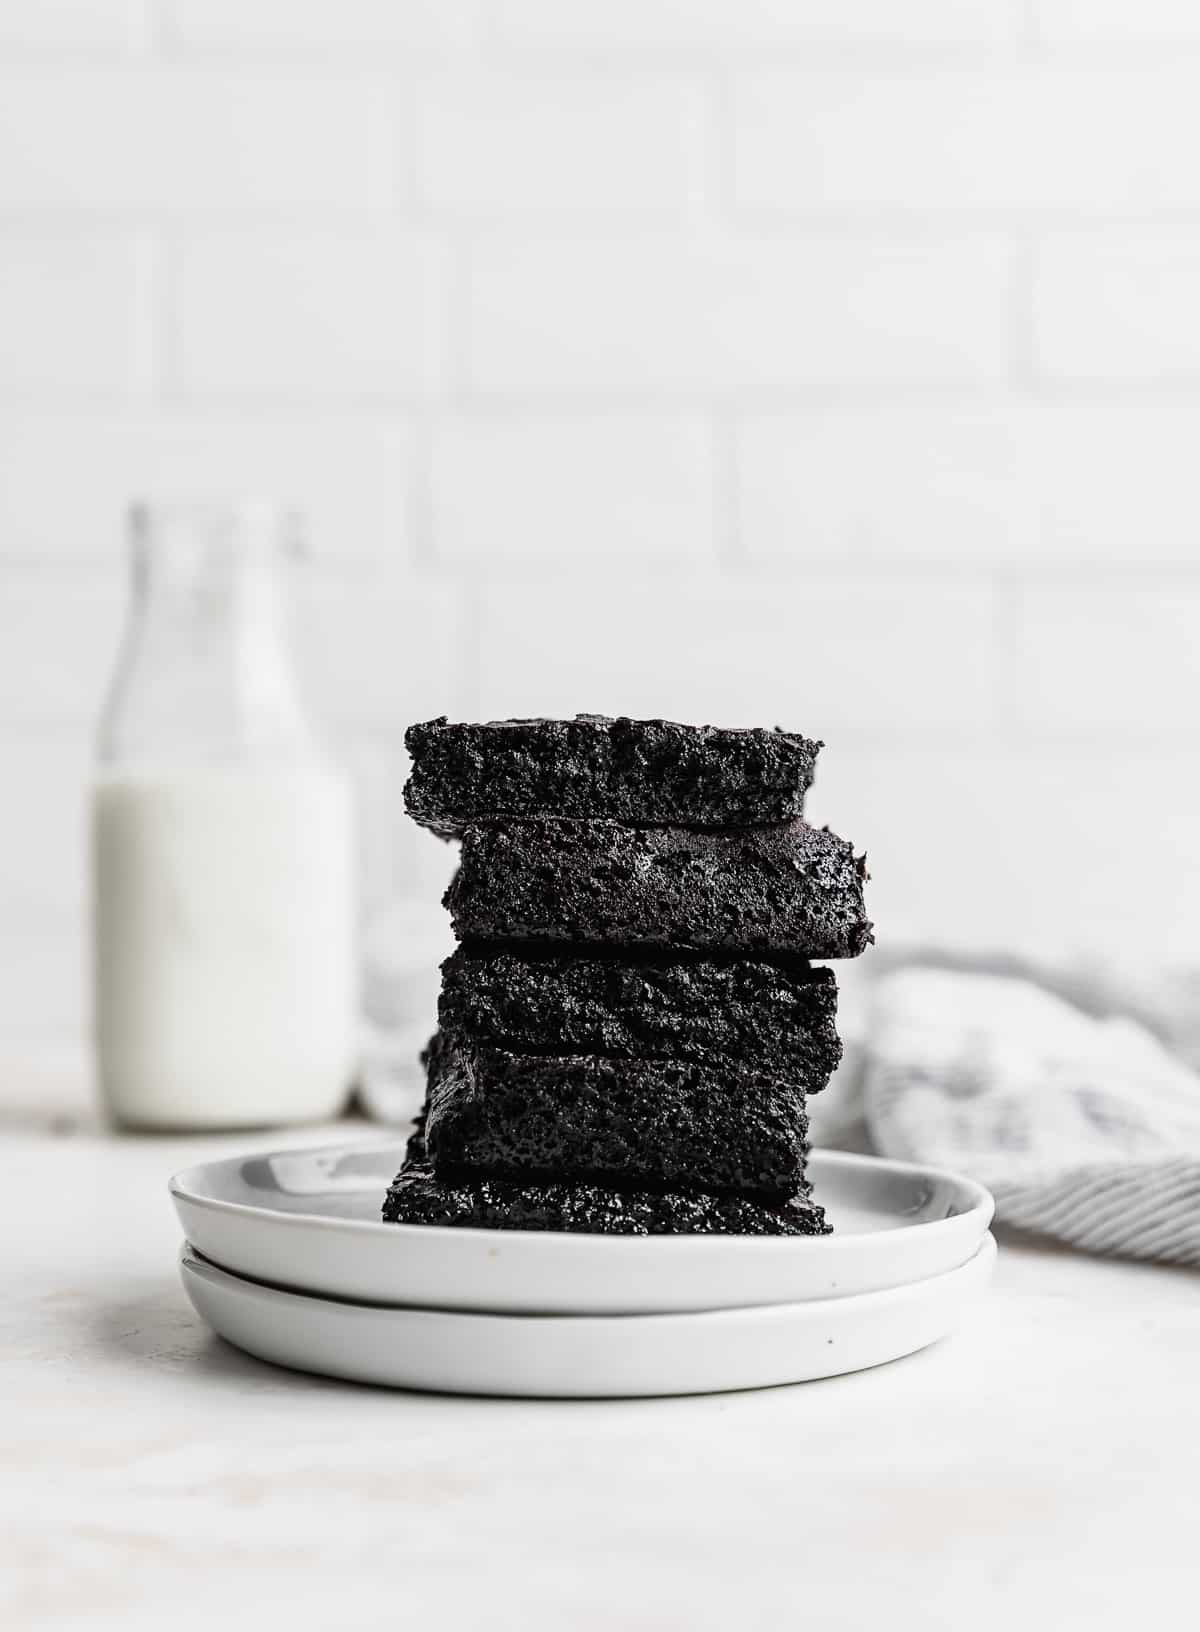 Five black cocoa brownie squares stacked on top of each other, on two white plates against a white brick background.